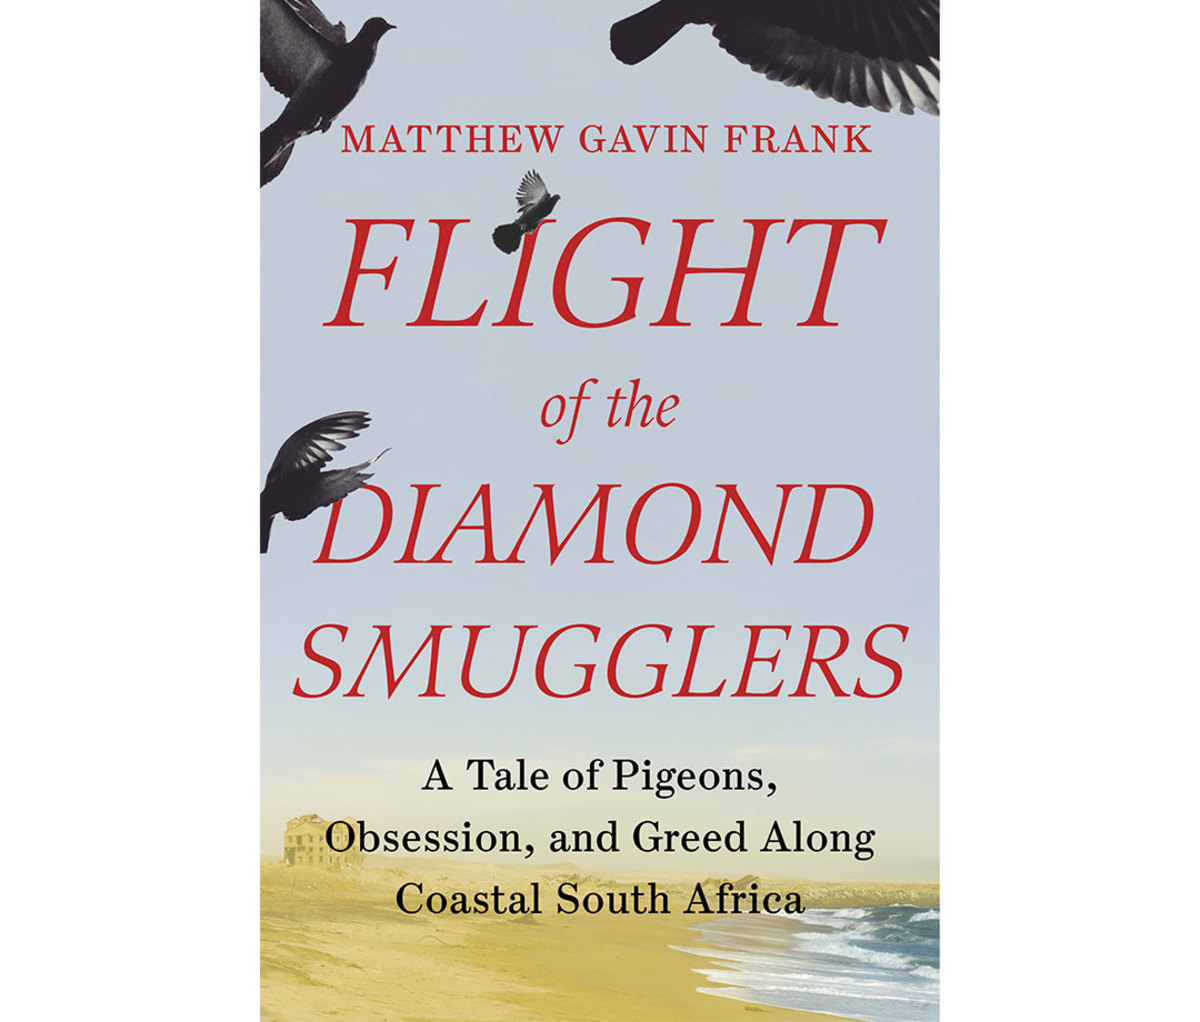 Front cover of book 'Flight of the Diamond Smugglers: A Tale of Pigeons, Obsession, and Greed Along Coastal South Africa' by Matthew Gavin Frank